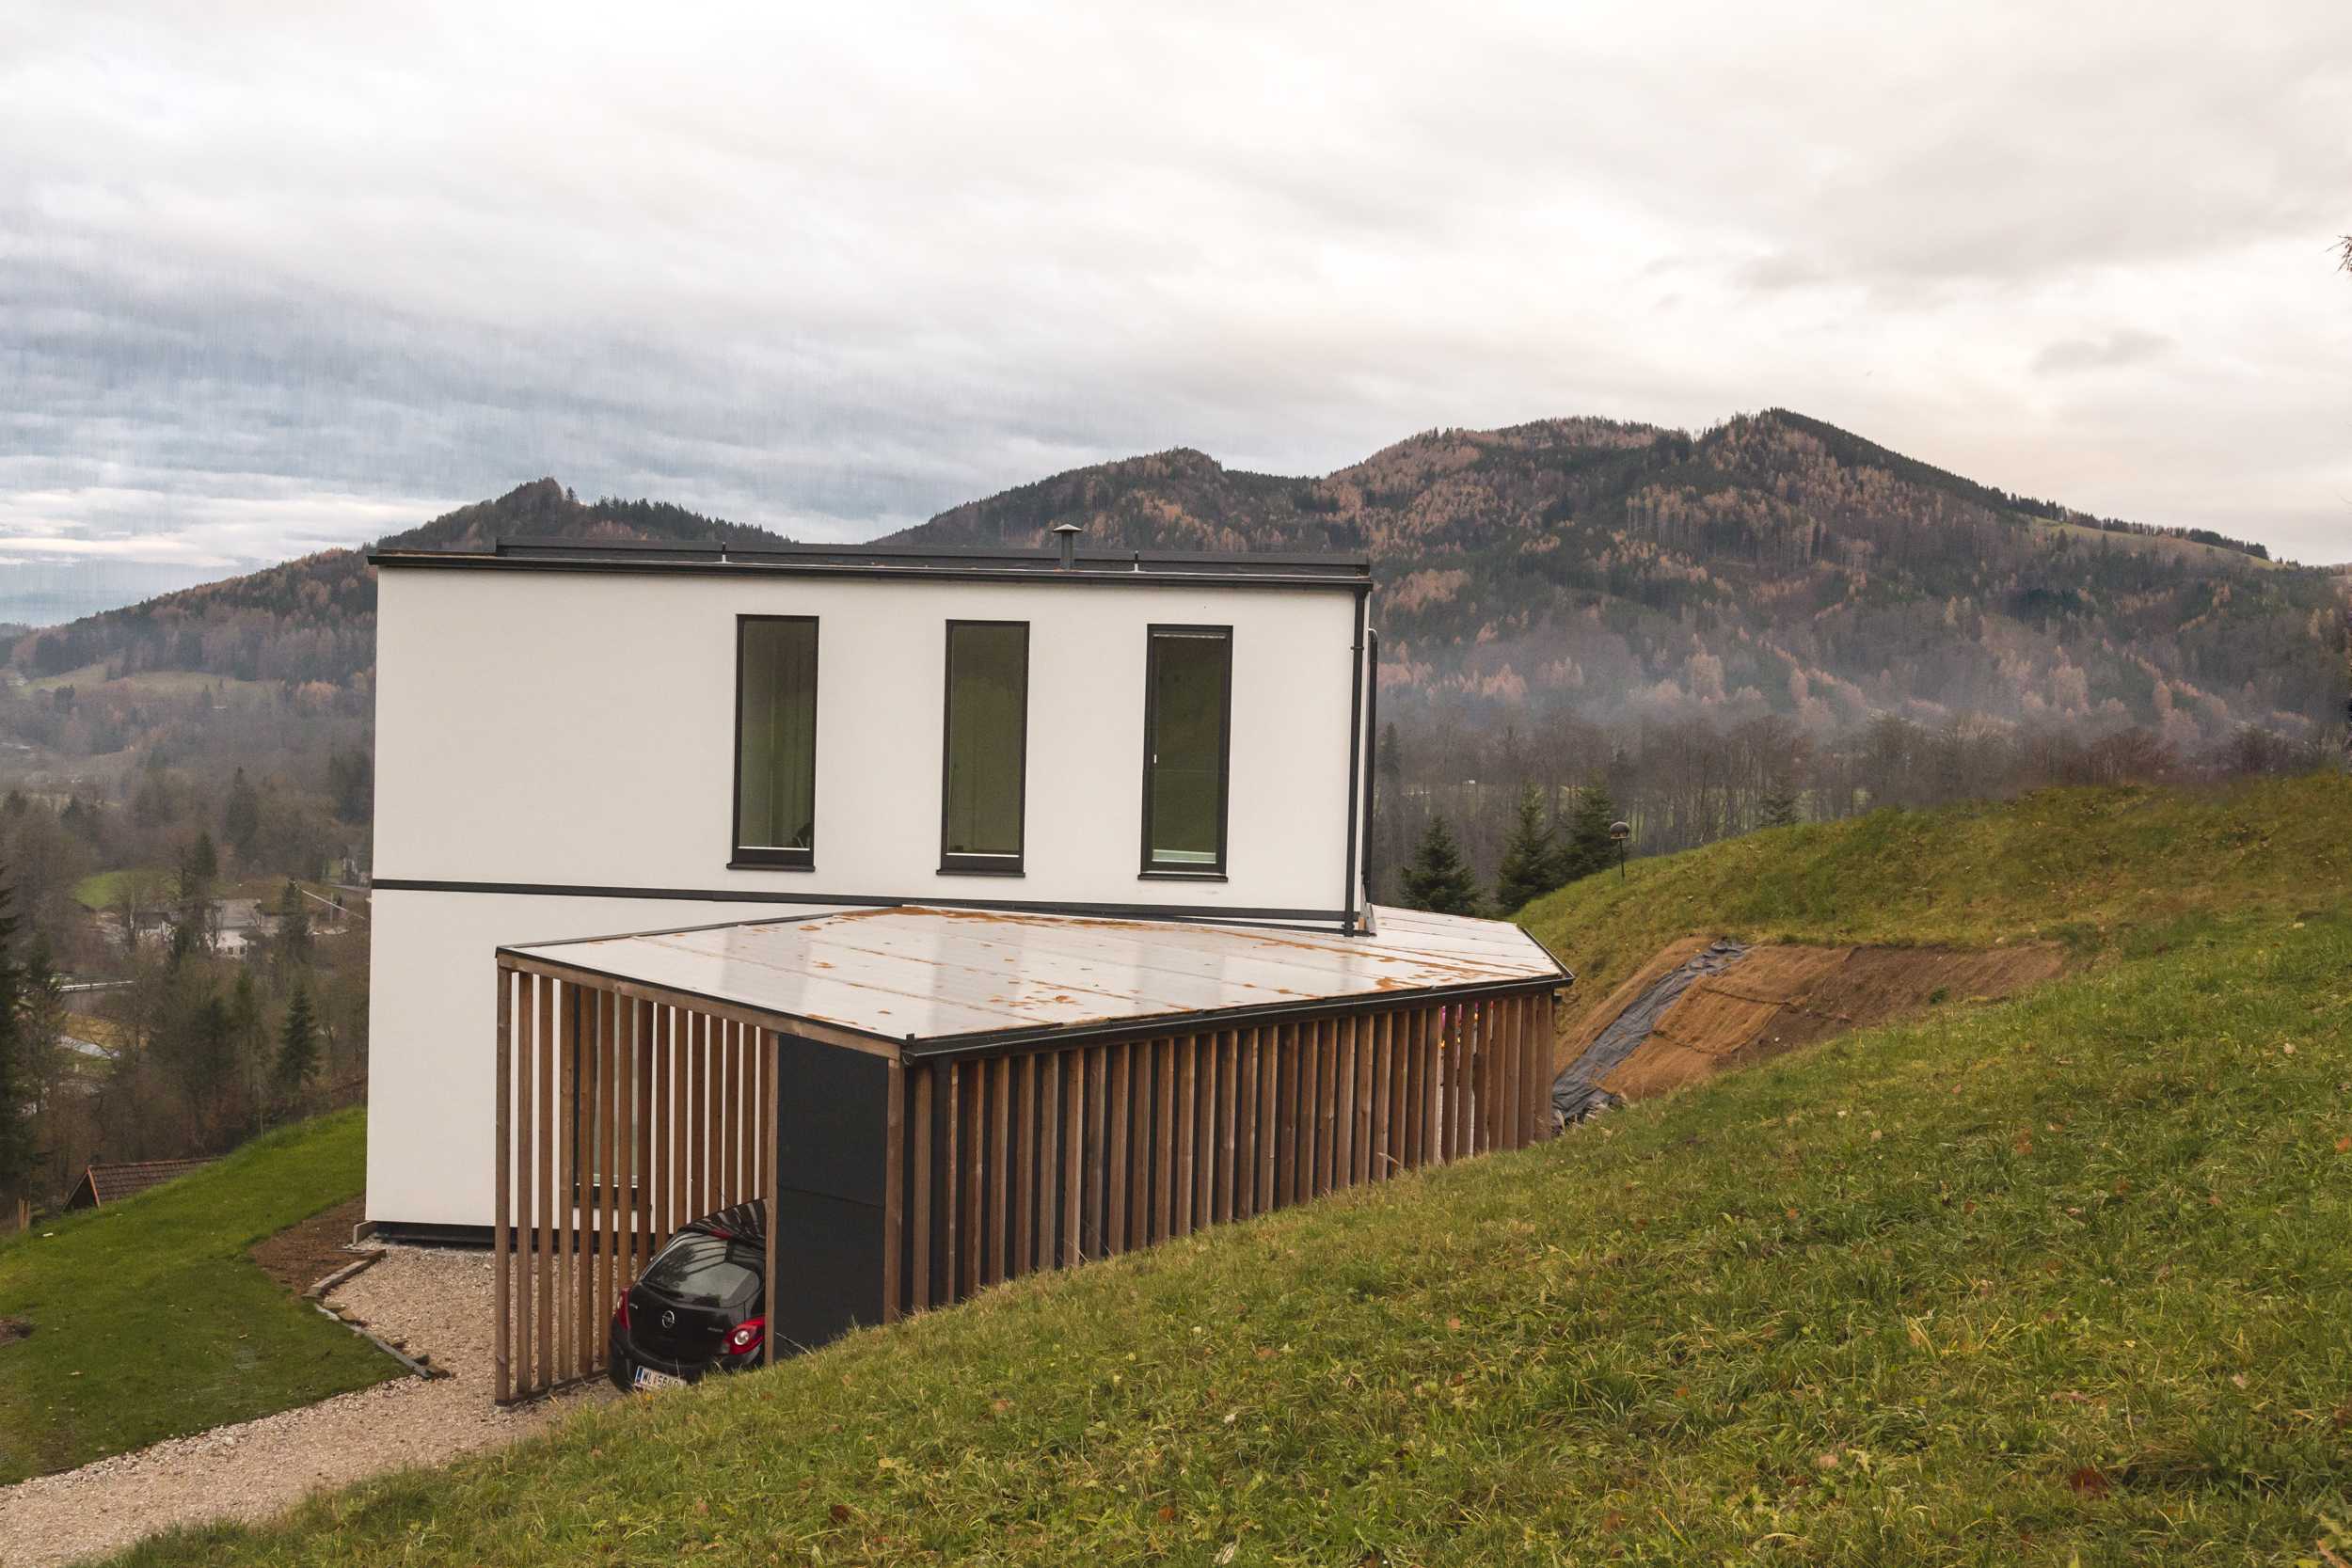 COMMOD „House on the Hill“ 108m² BGF